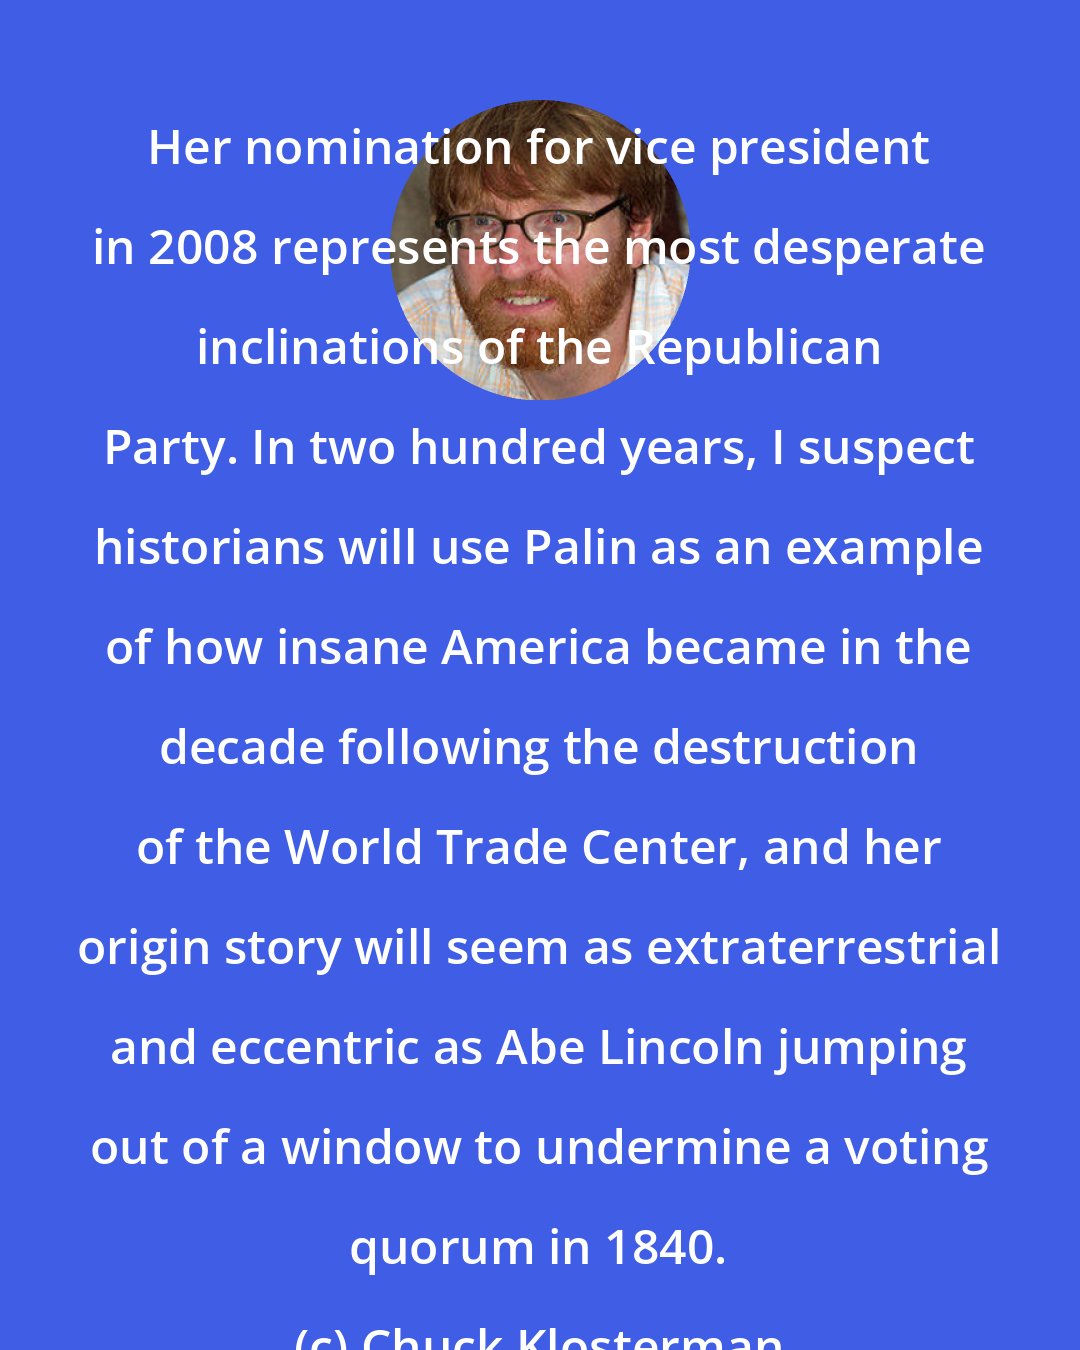 Chuck Klosterman: Her nomination for vice president in 2008 represents the most desperate inclinations of the Republican Party. In two hundred years, I suspect historians will use Palin as an example of how insane America became in the decade following the destruction of the World Trade Center, and her origin story will seem as extraterrestrial and eccentric as Abe Lincoln jumping out of a window to undermine a voting quorum in 1840.